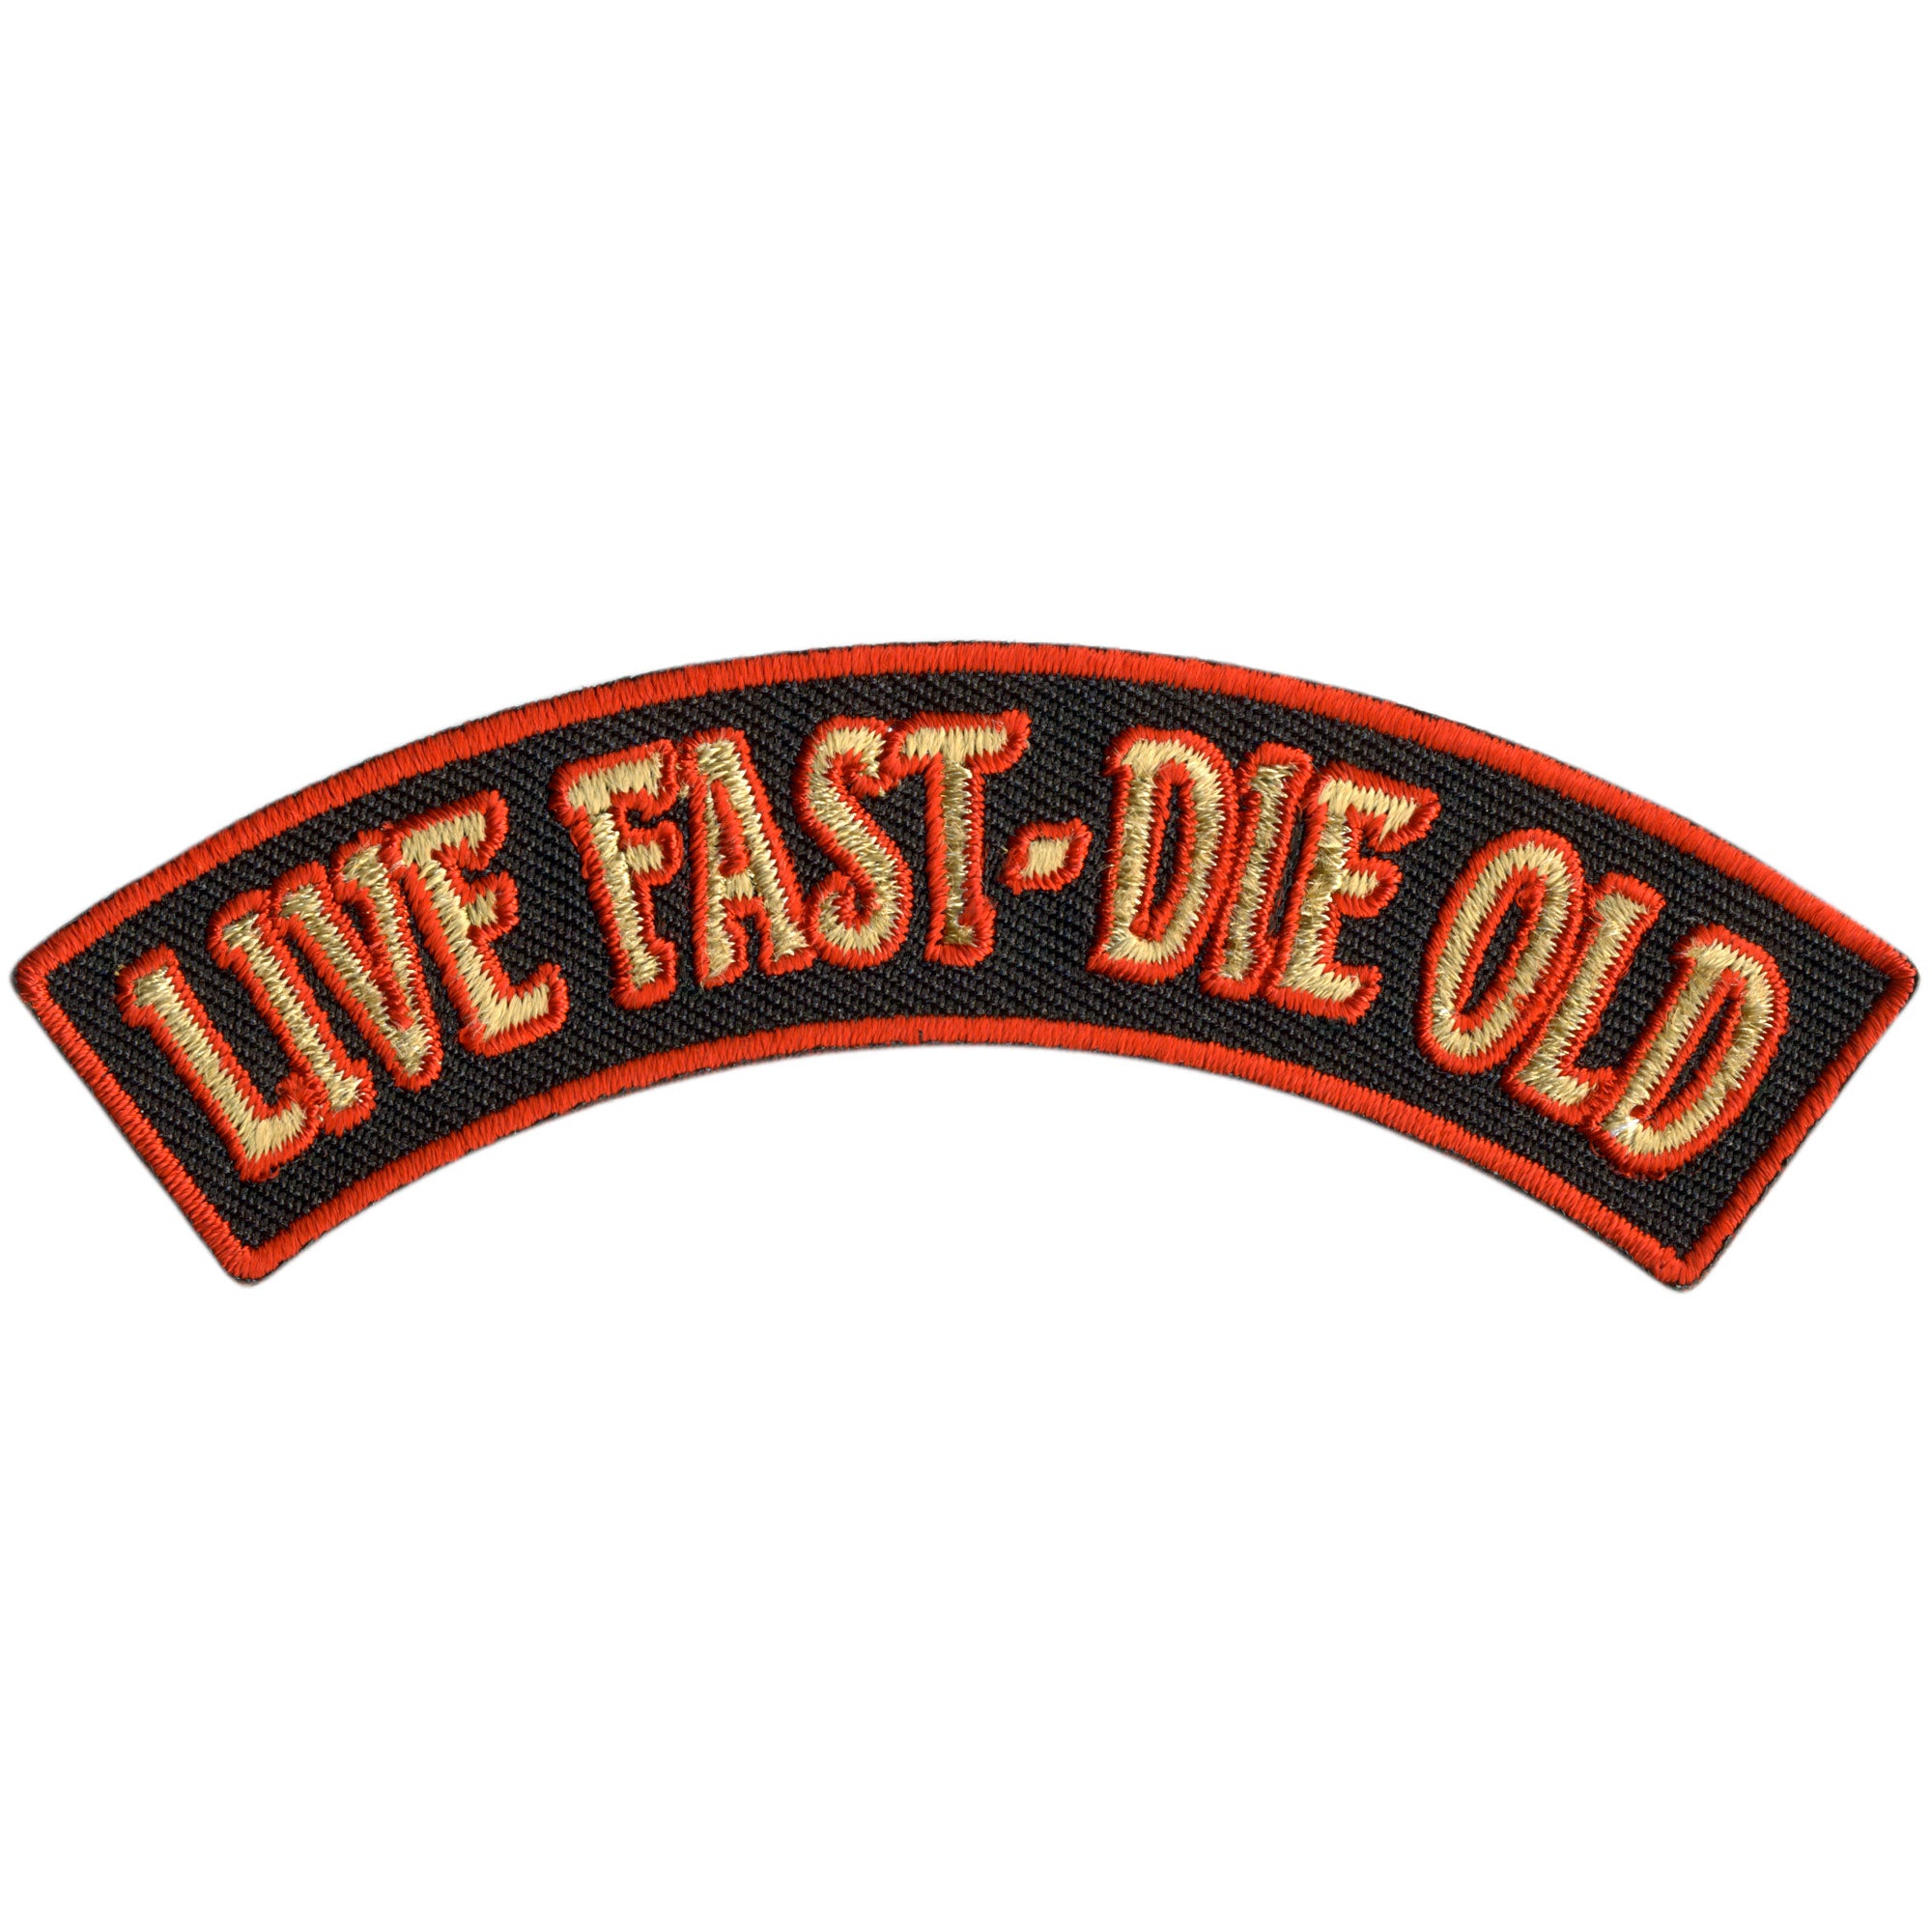 Hot Leathers Live Fast - Die Old 4” X 1” Top Rocker Patch